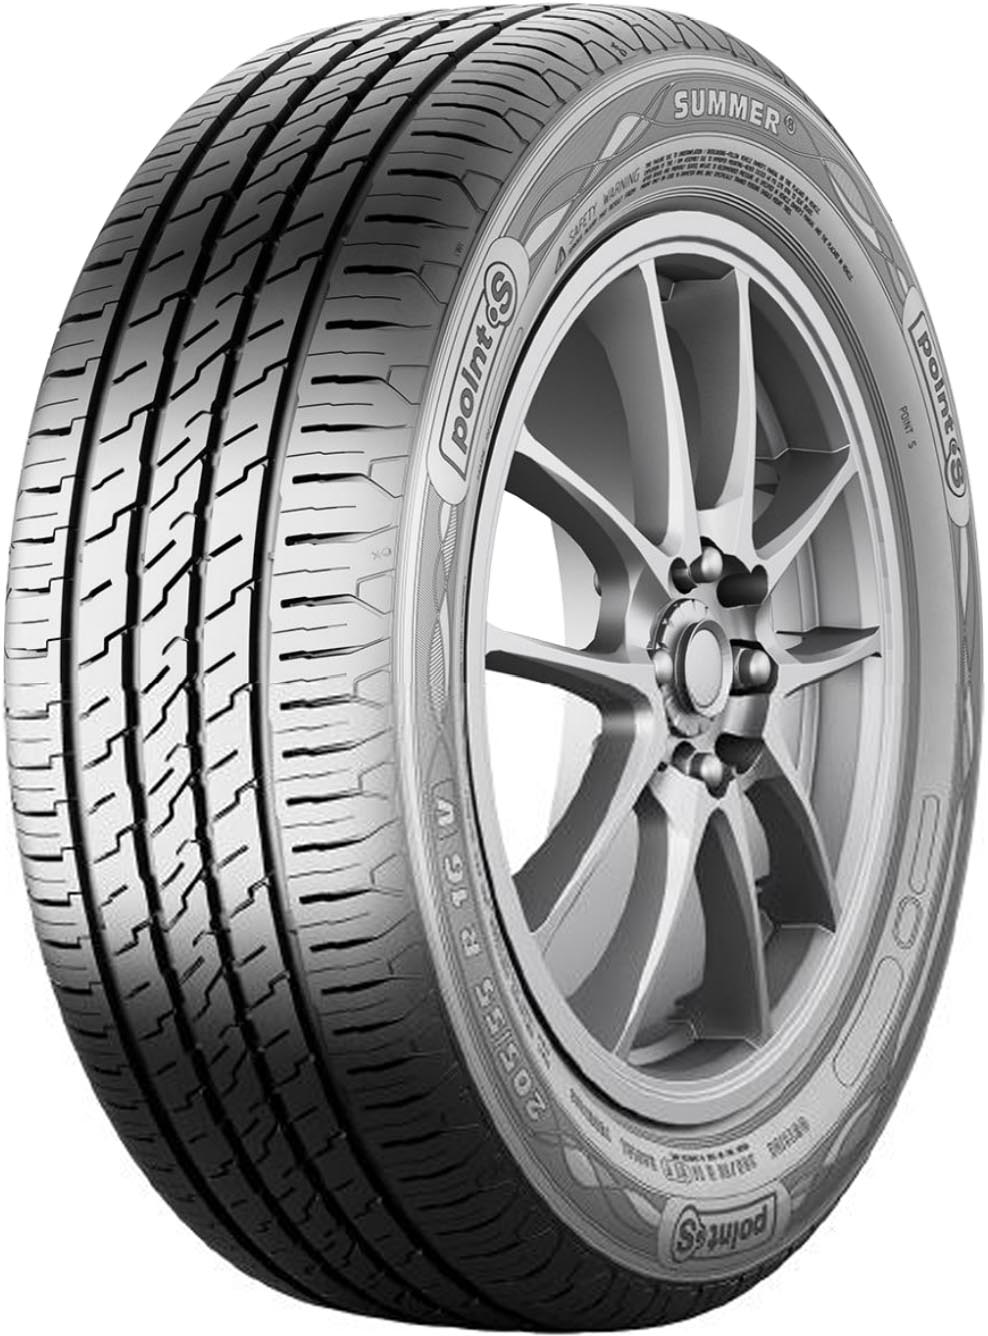 POINTS SUMMER S 245/40R18 97Y